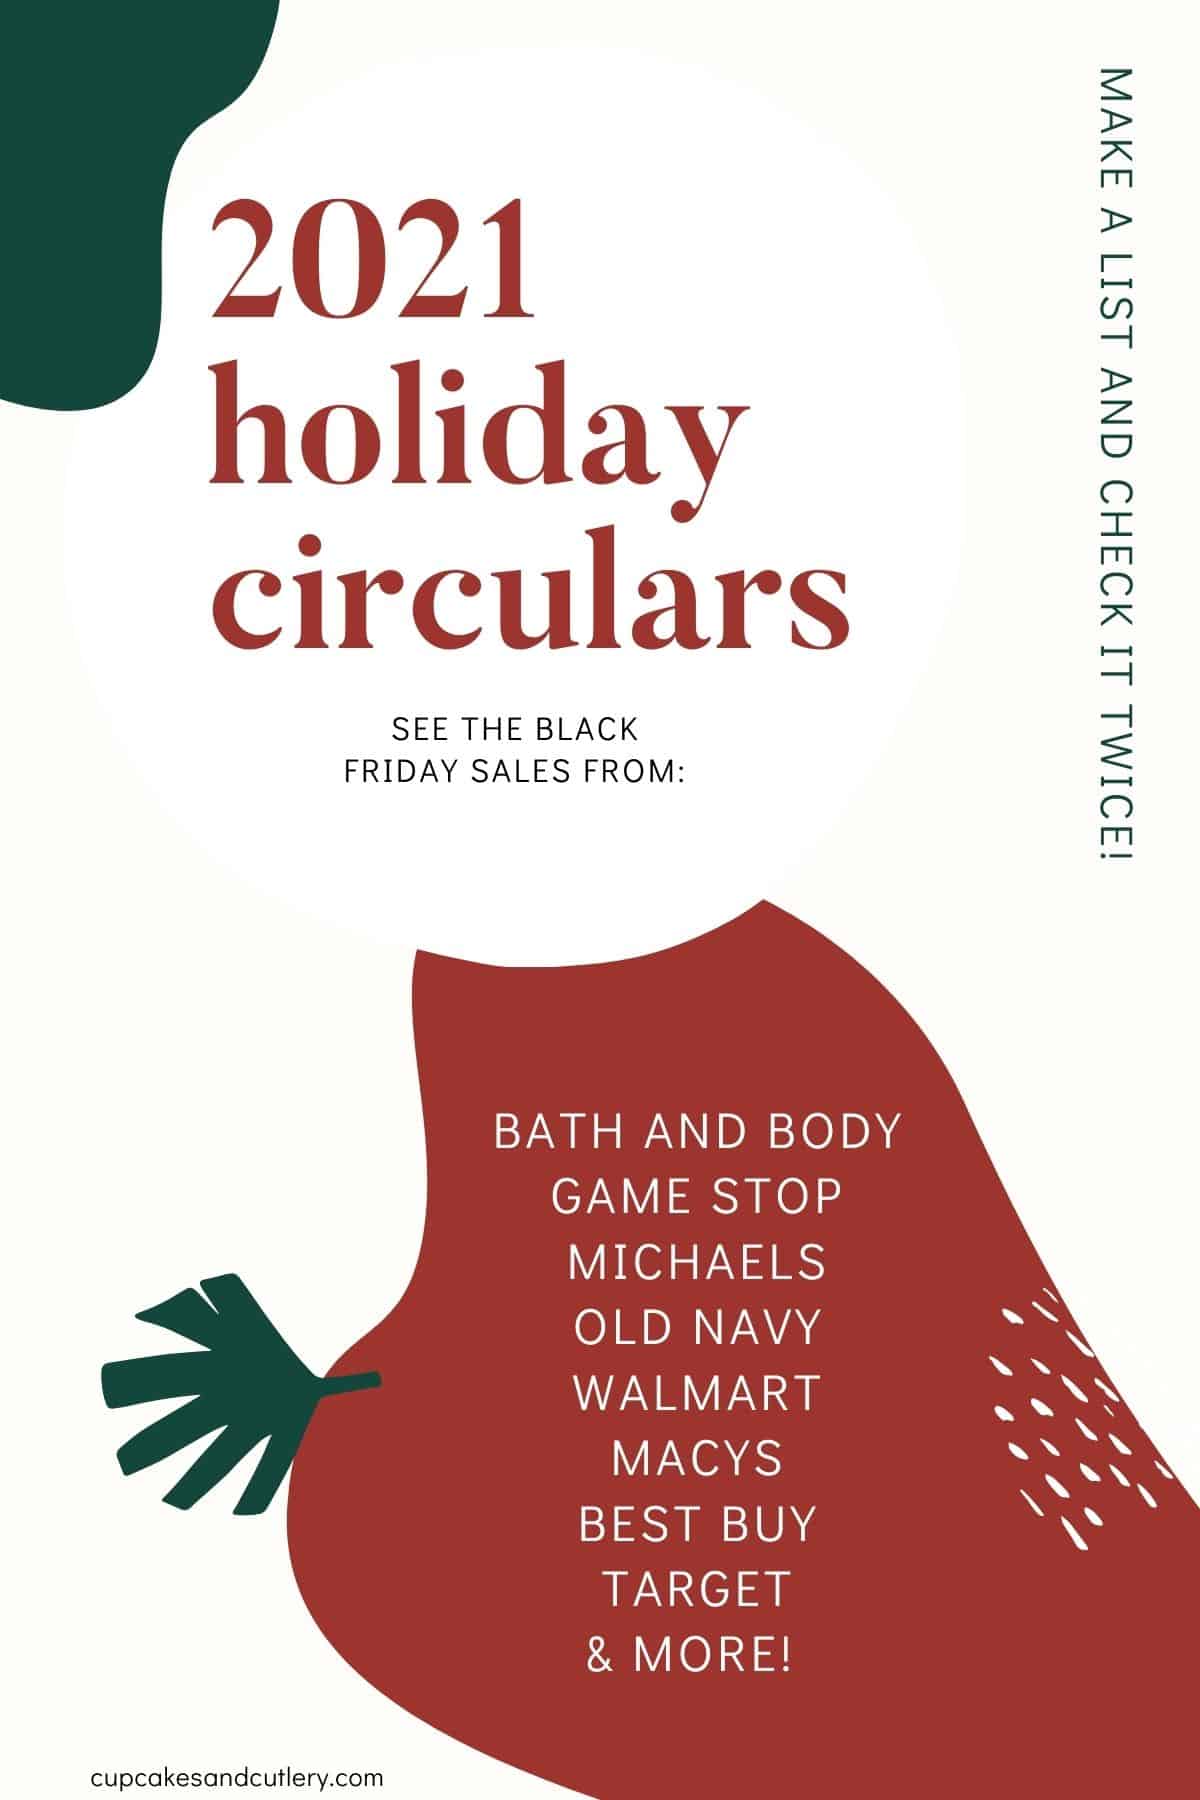 A list of retailers who have Black Friday circulars for 2021.